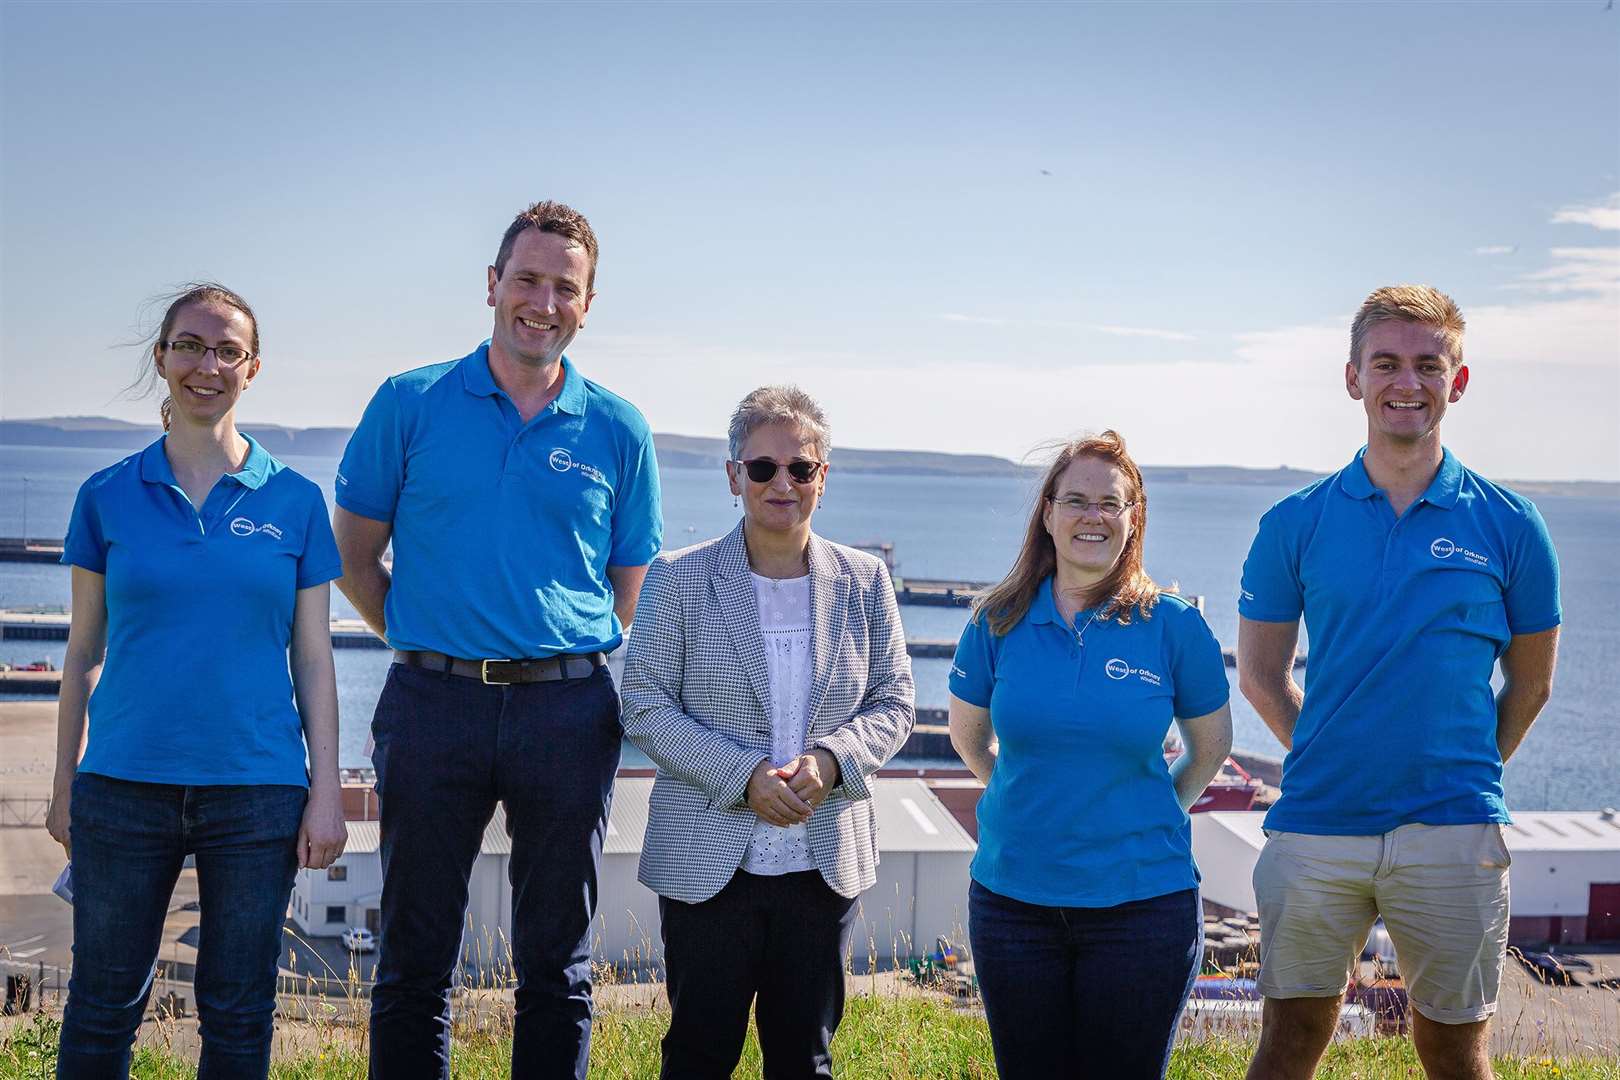 Trudy Morris (centre) of Caithness Chamber of Commerce at Scrabster with (from left) Katy Murphy, Jack Farnham, Lesley Sinclair and Will Philbedge of West of Orkney wind farm.